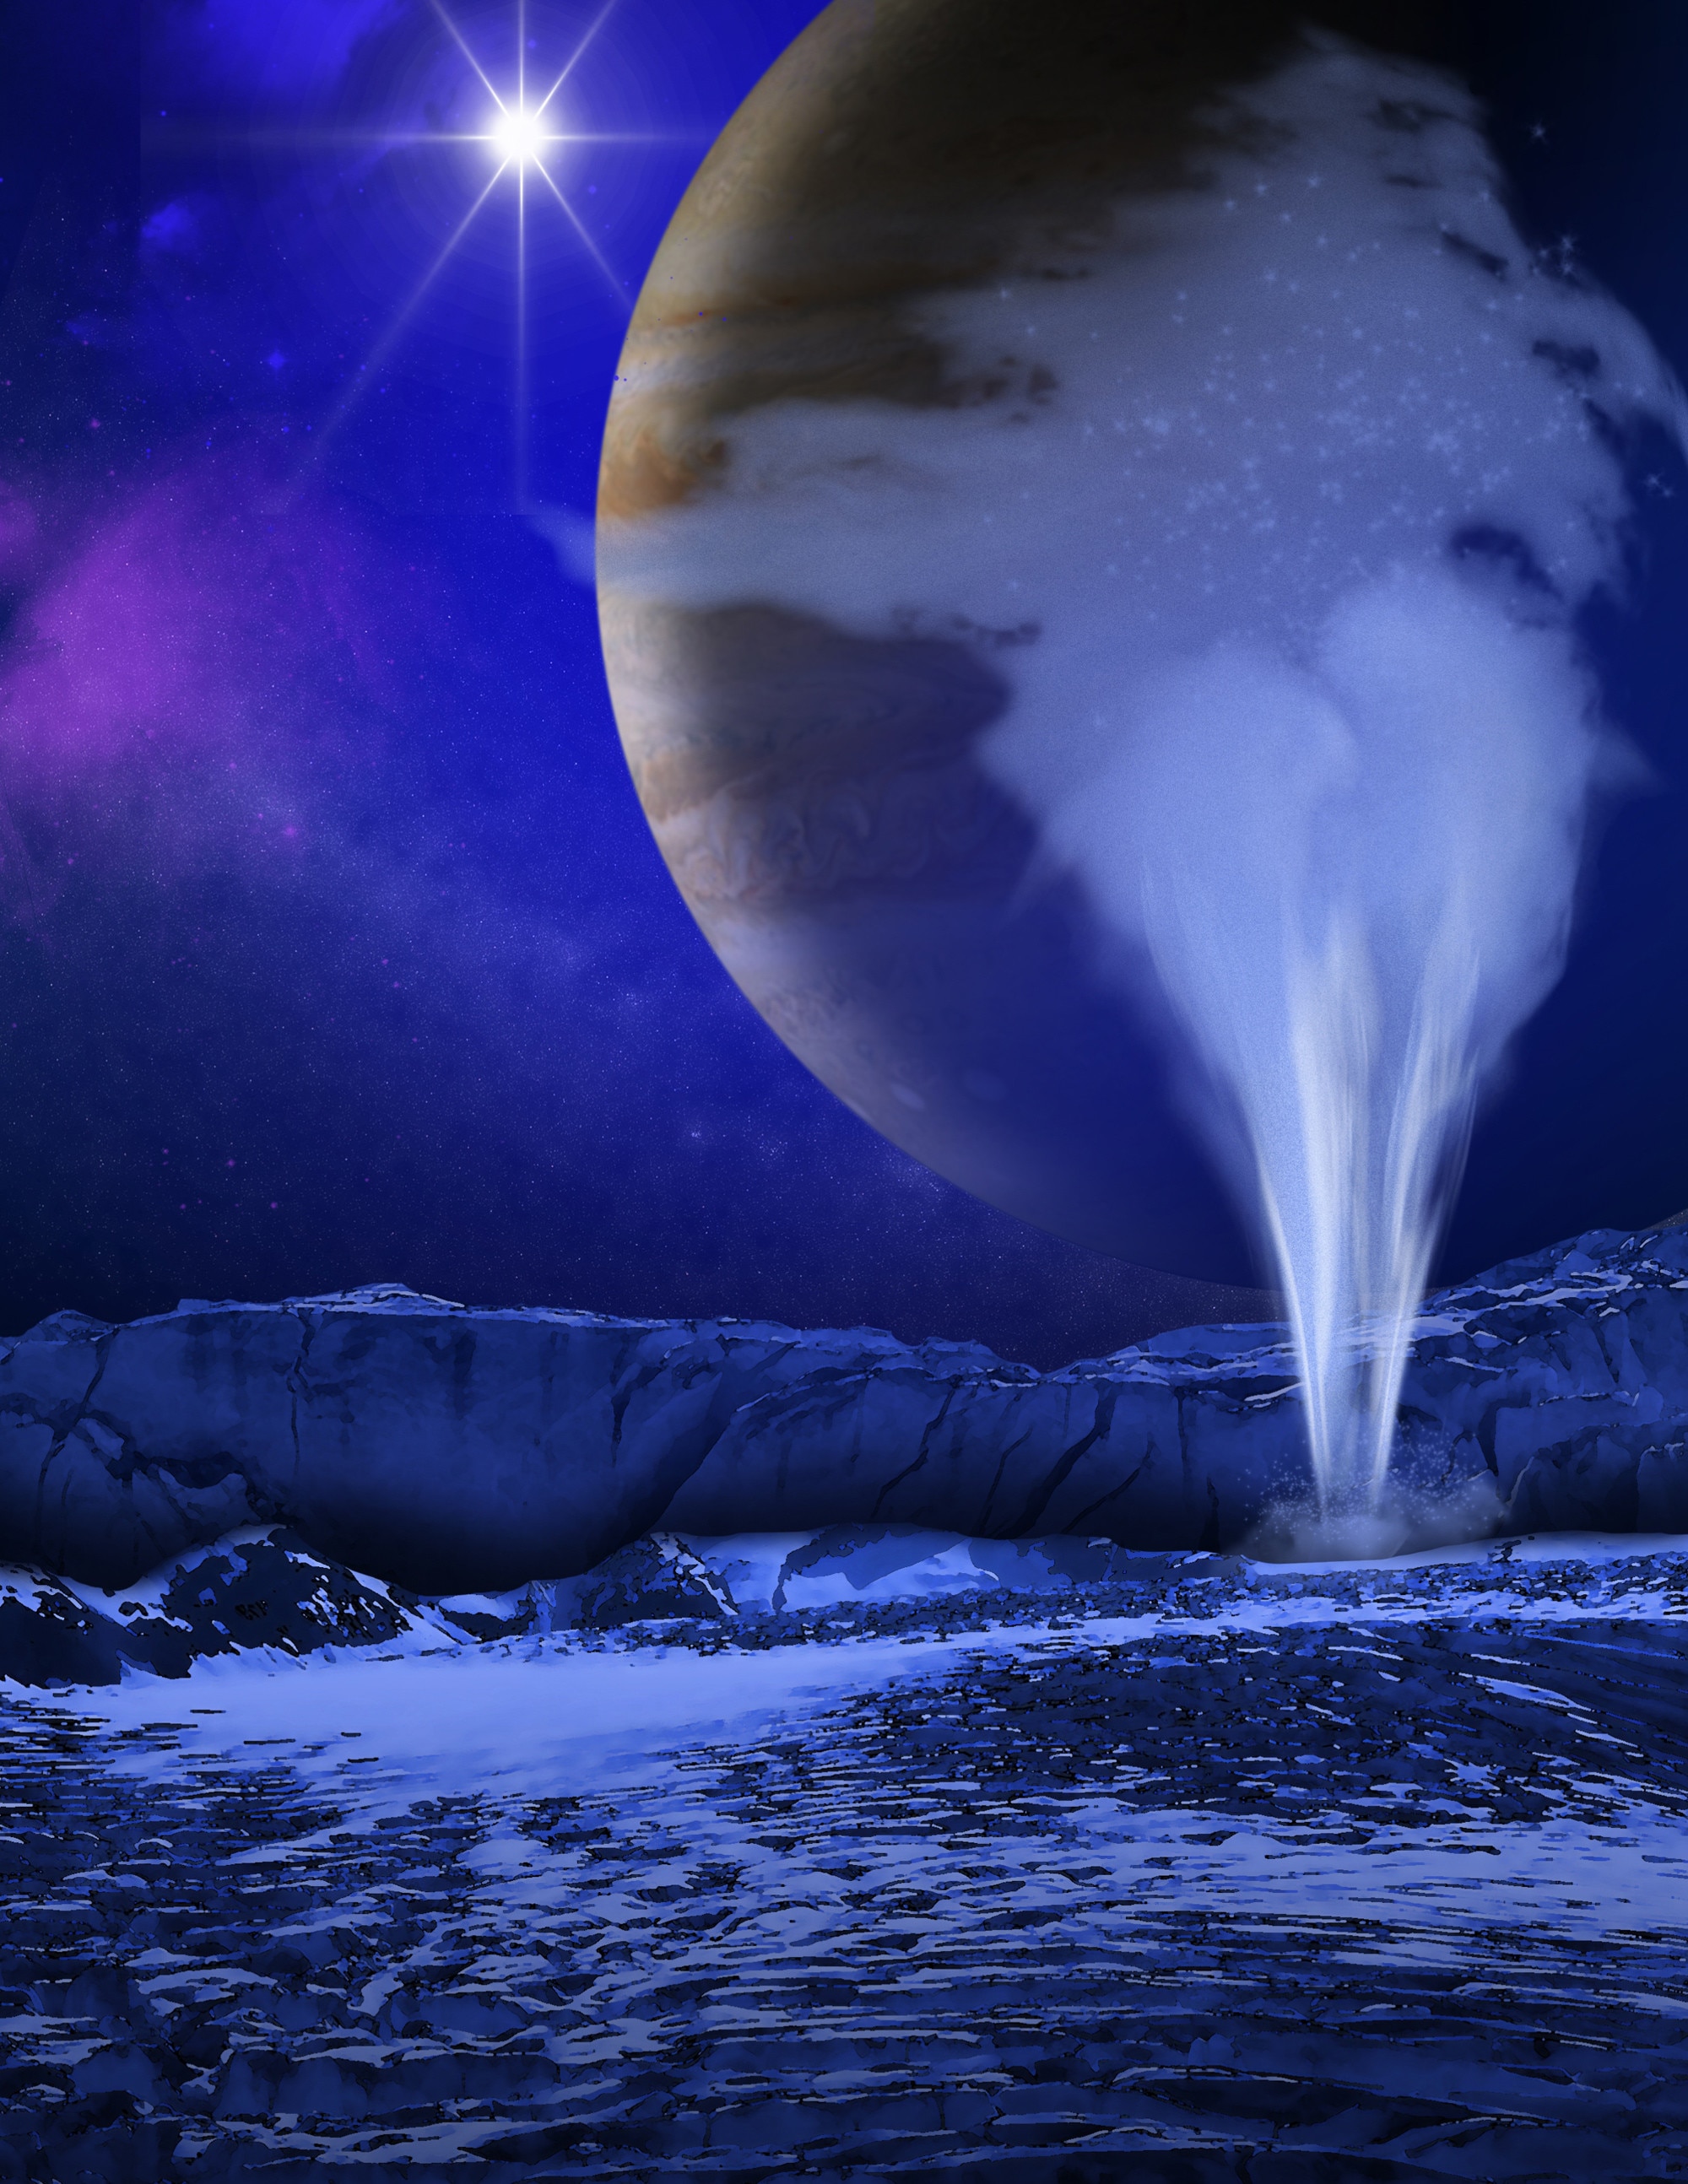 Artist’s concept of a plume of water erupting from under the surface of Jupiter’s moon Europa. Credit: NASA/ESA/K. Retherford/SWRI